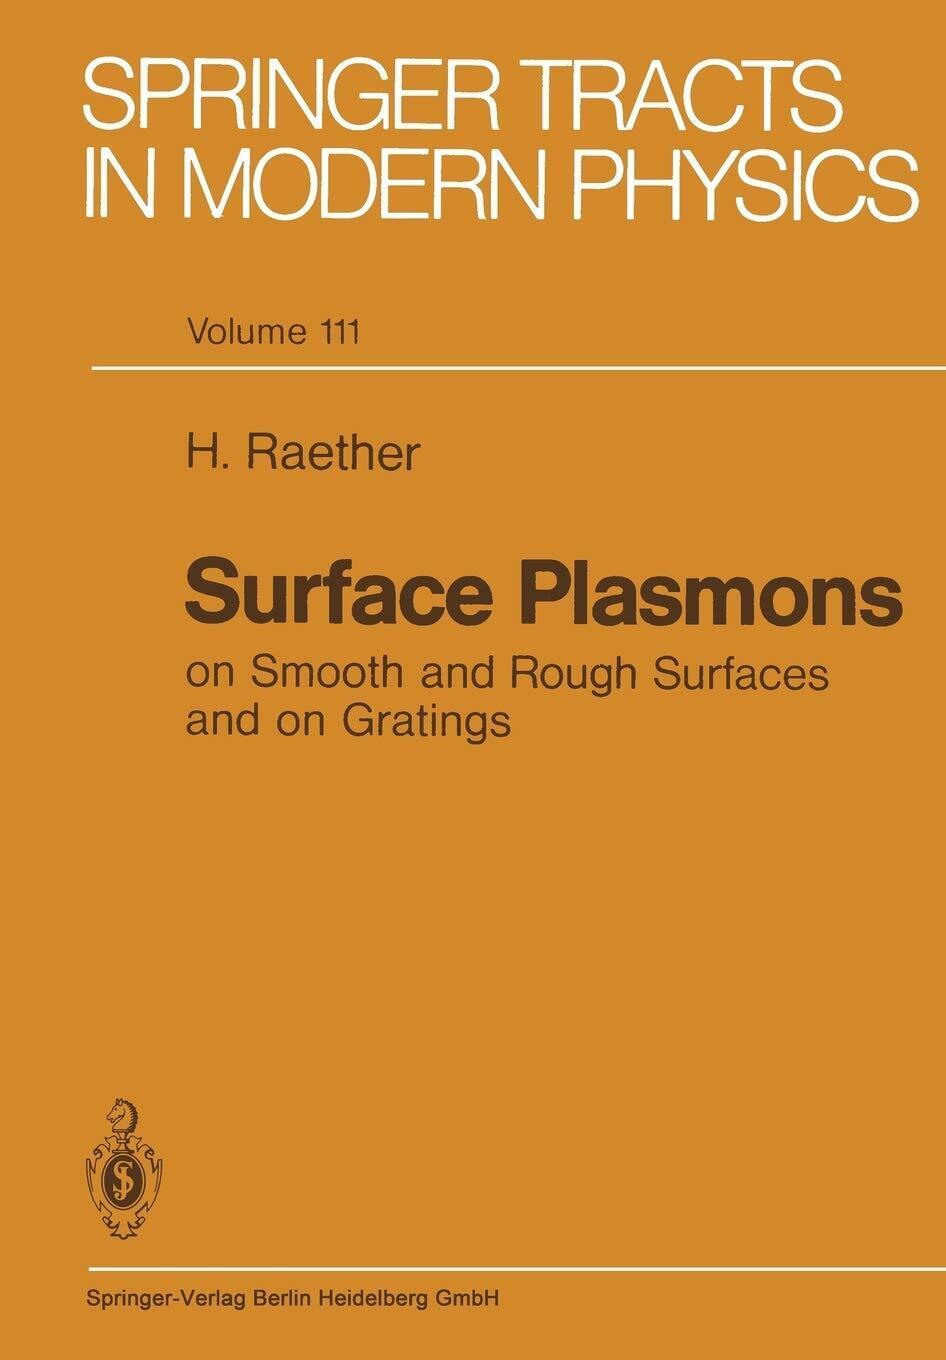 Surface Plasmons on Smooth and Rough Surfaces and on Gratings - Springer, 2013